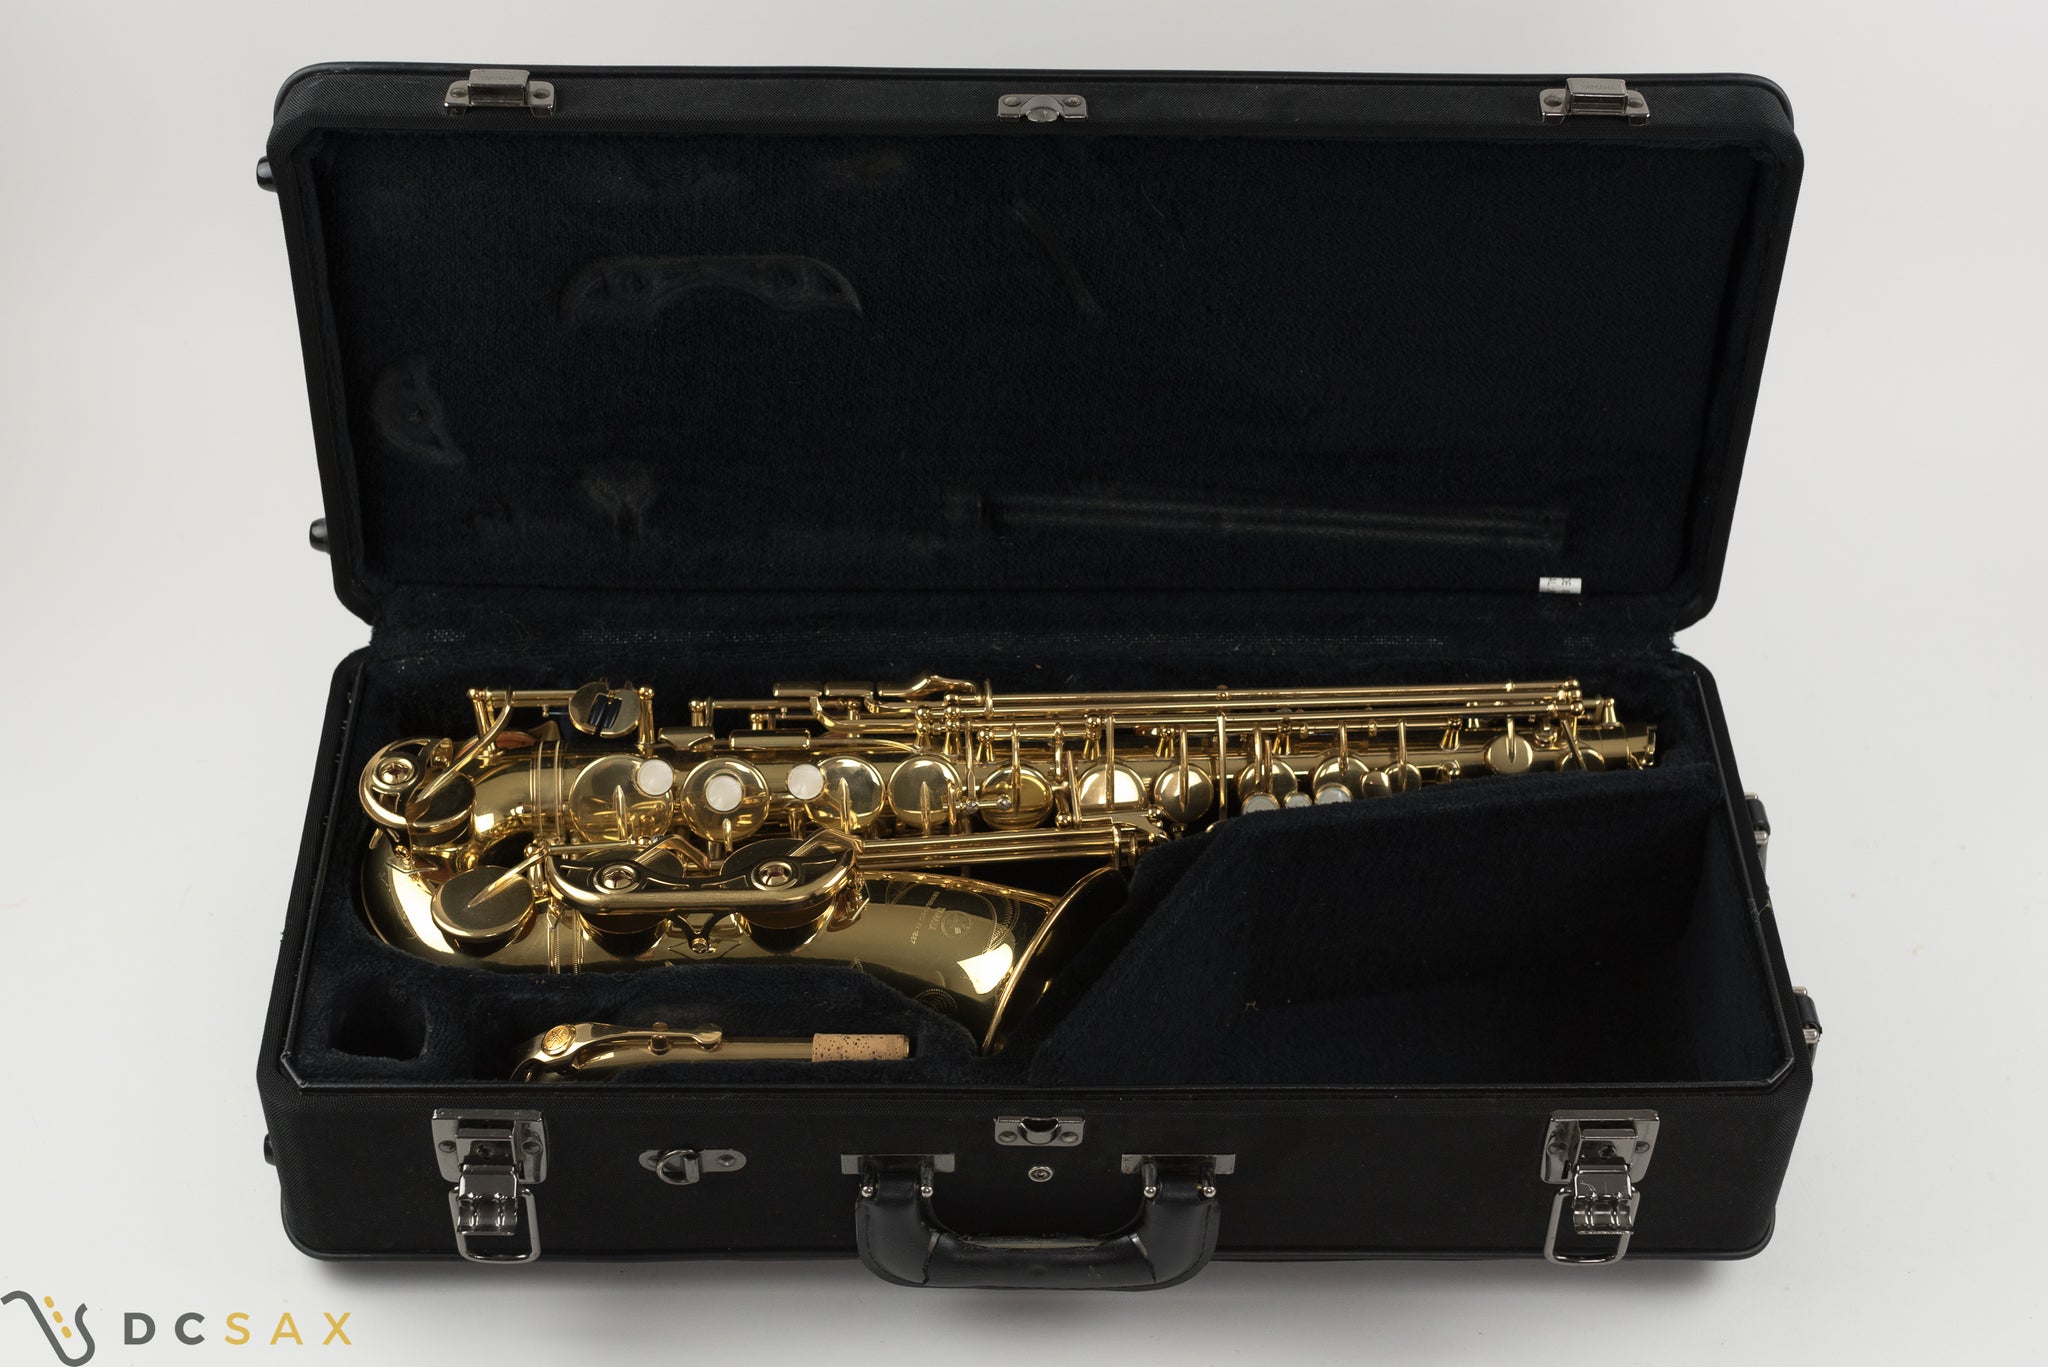 Yamaha YAS-62 Alto Saxophone, Series II, Just Serviced, Excellent Condition, Video